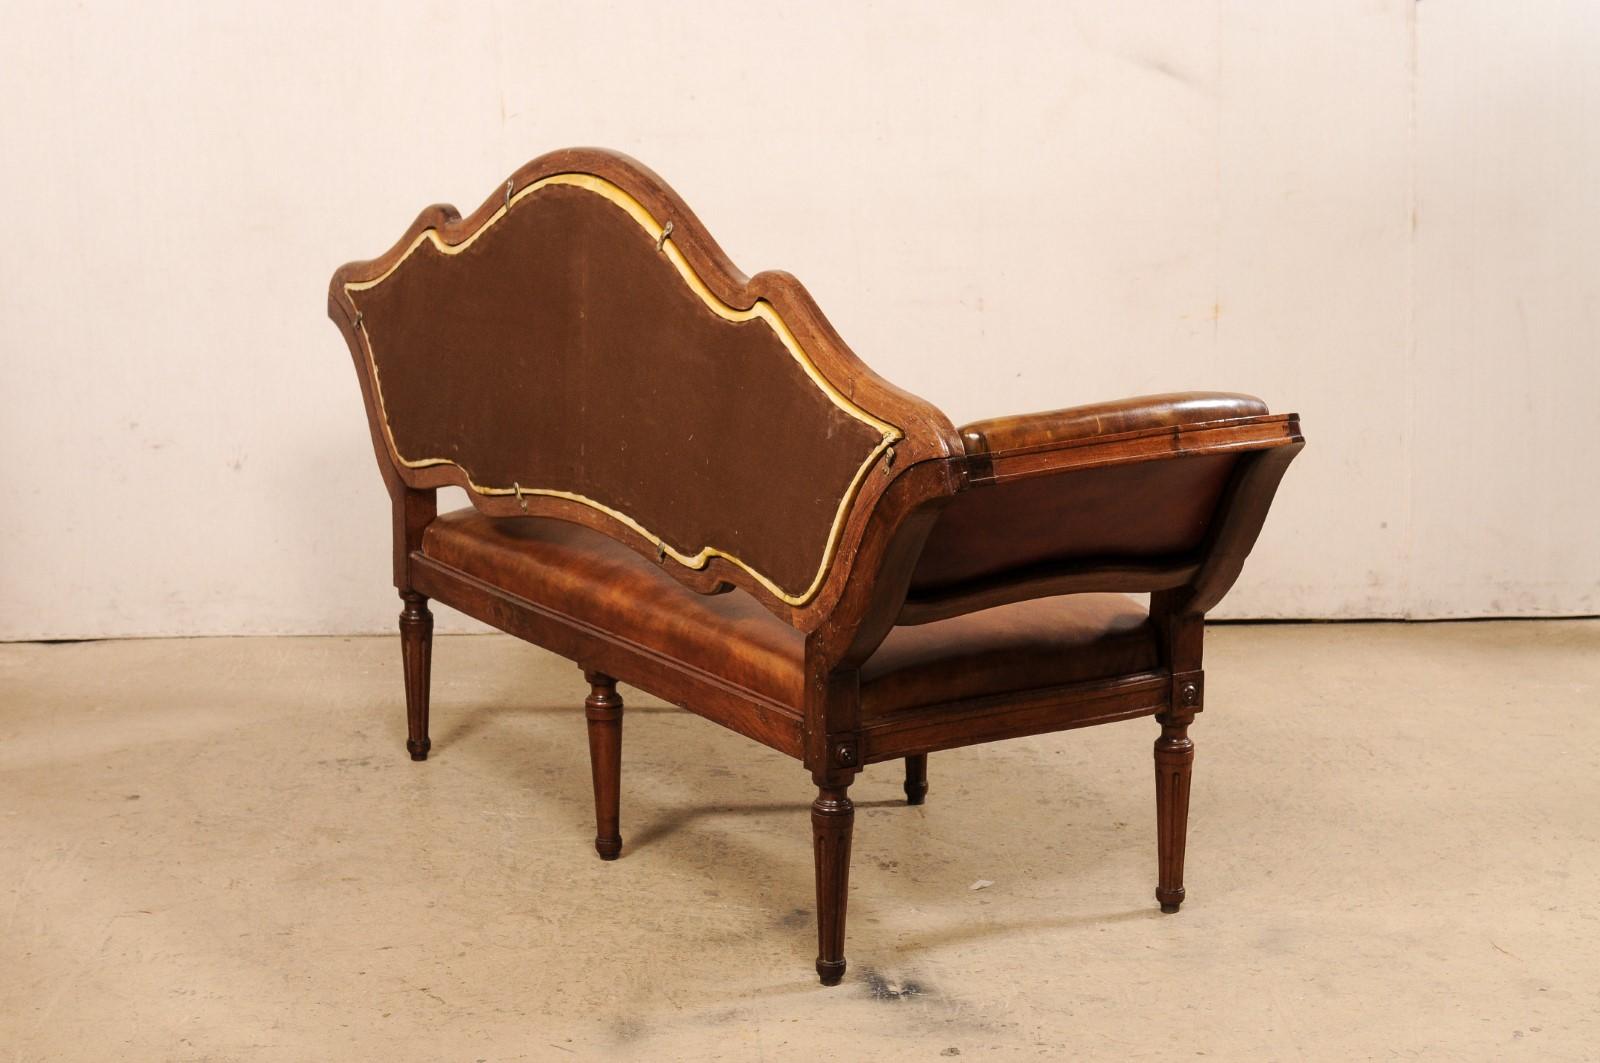 Italian Venetian Leather Upholstered & Carved Wood Settee Sofa, 19th Century For Sale 4